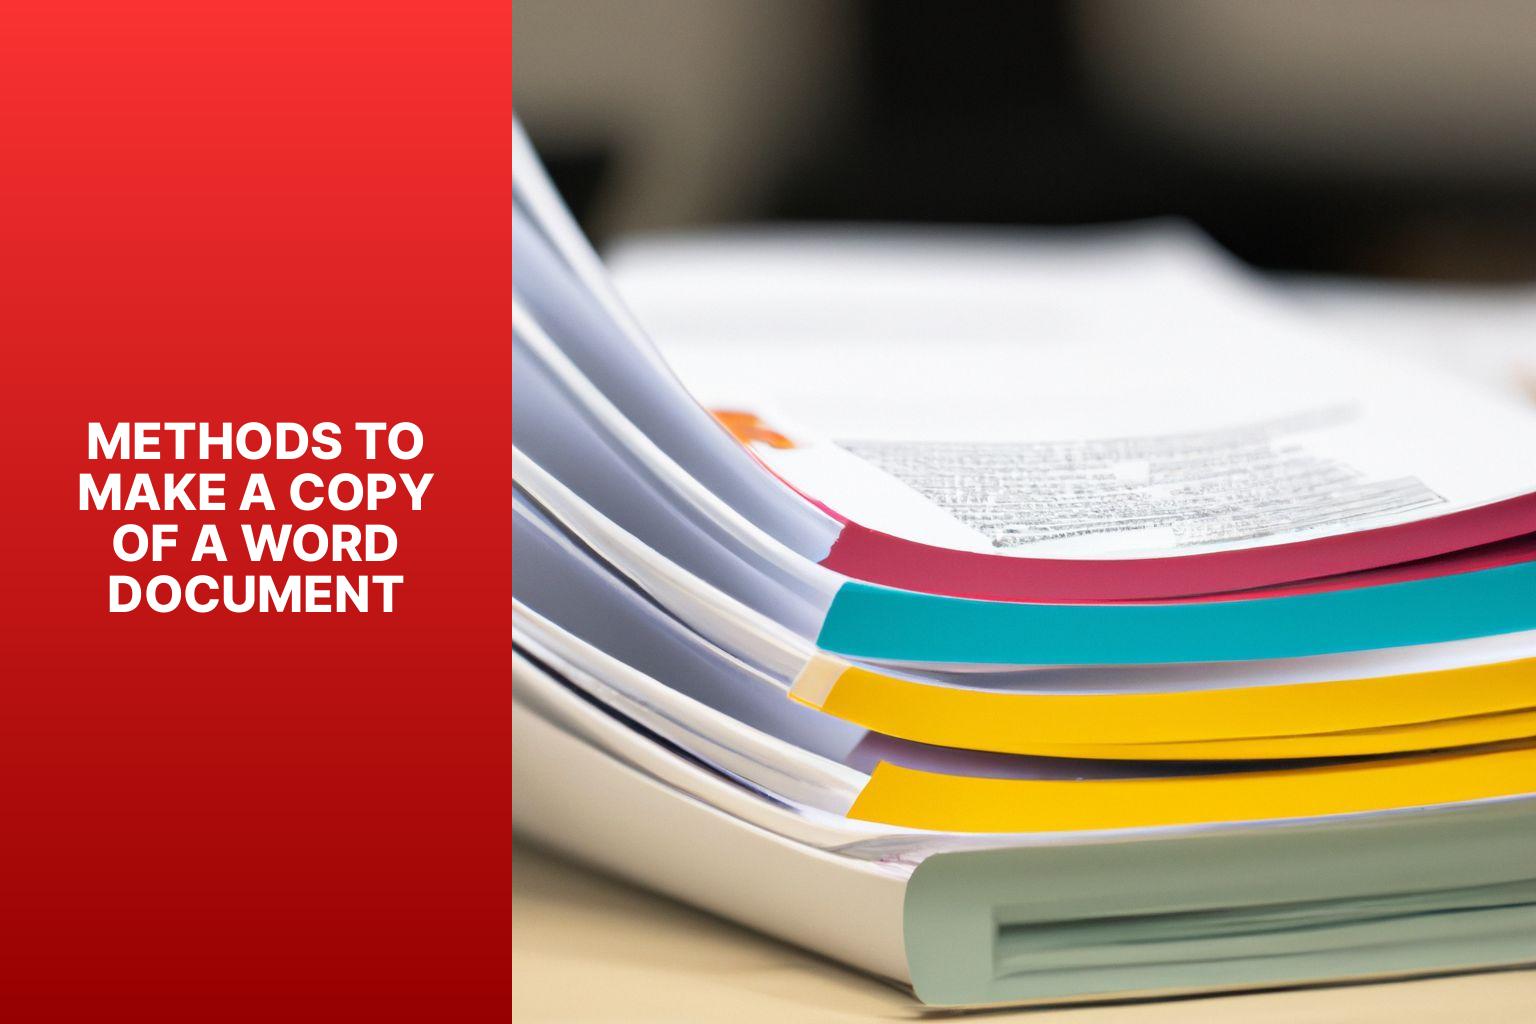 Methods to Make a Copy of a Word Document - how to make a copy of a word document 